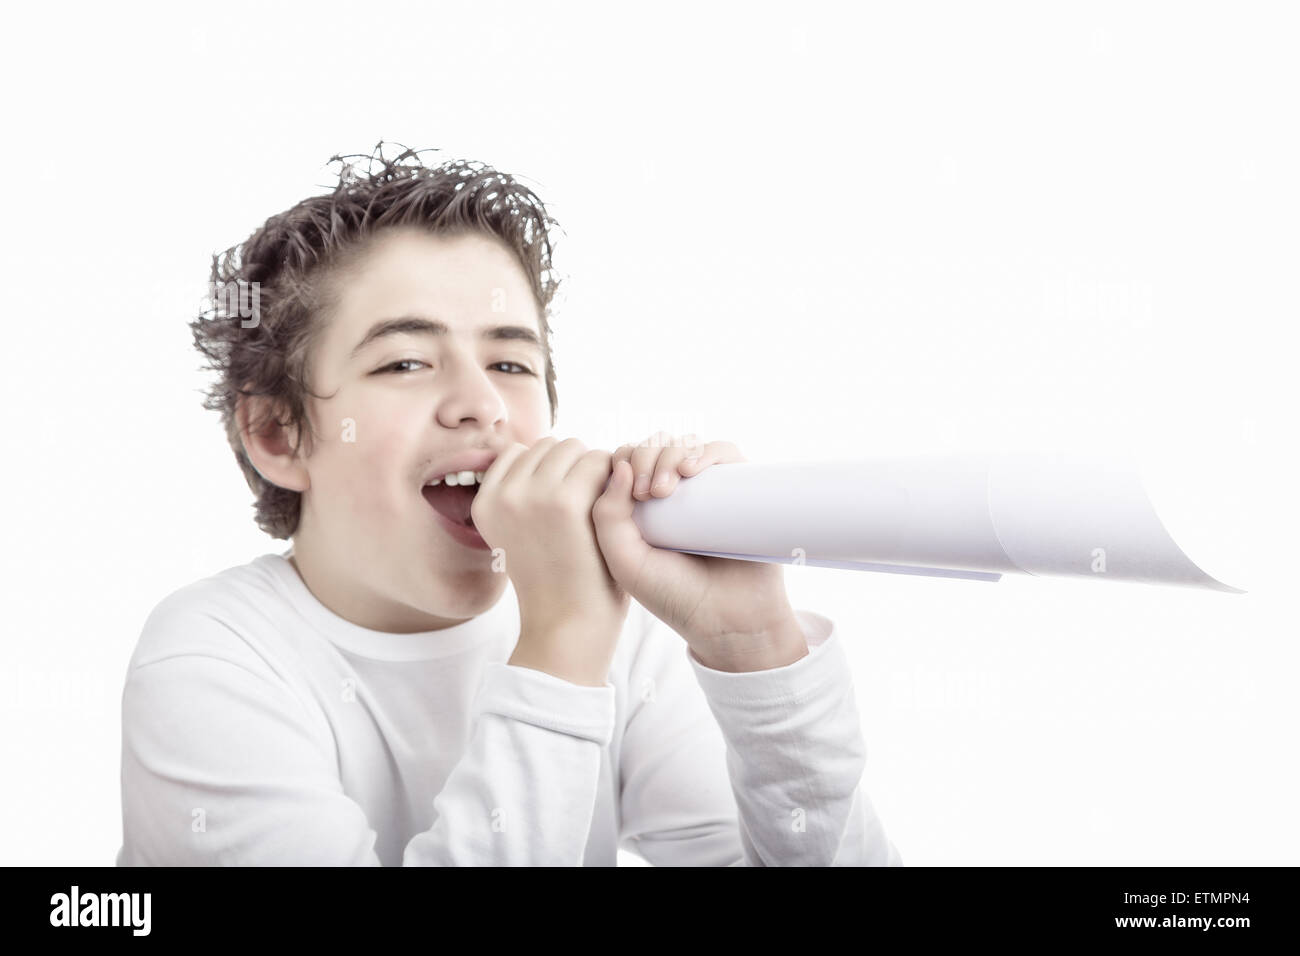 Handsome smiling hispanic boy with medium length hair and questioning eyes shouts in a fake megaphone made with white paper Stock Photo